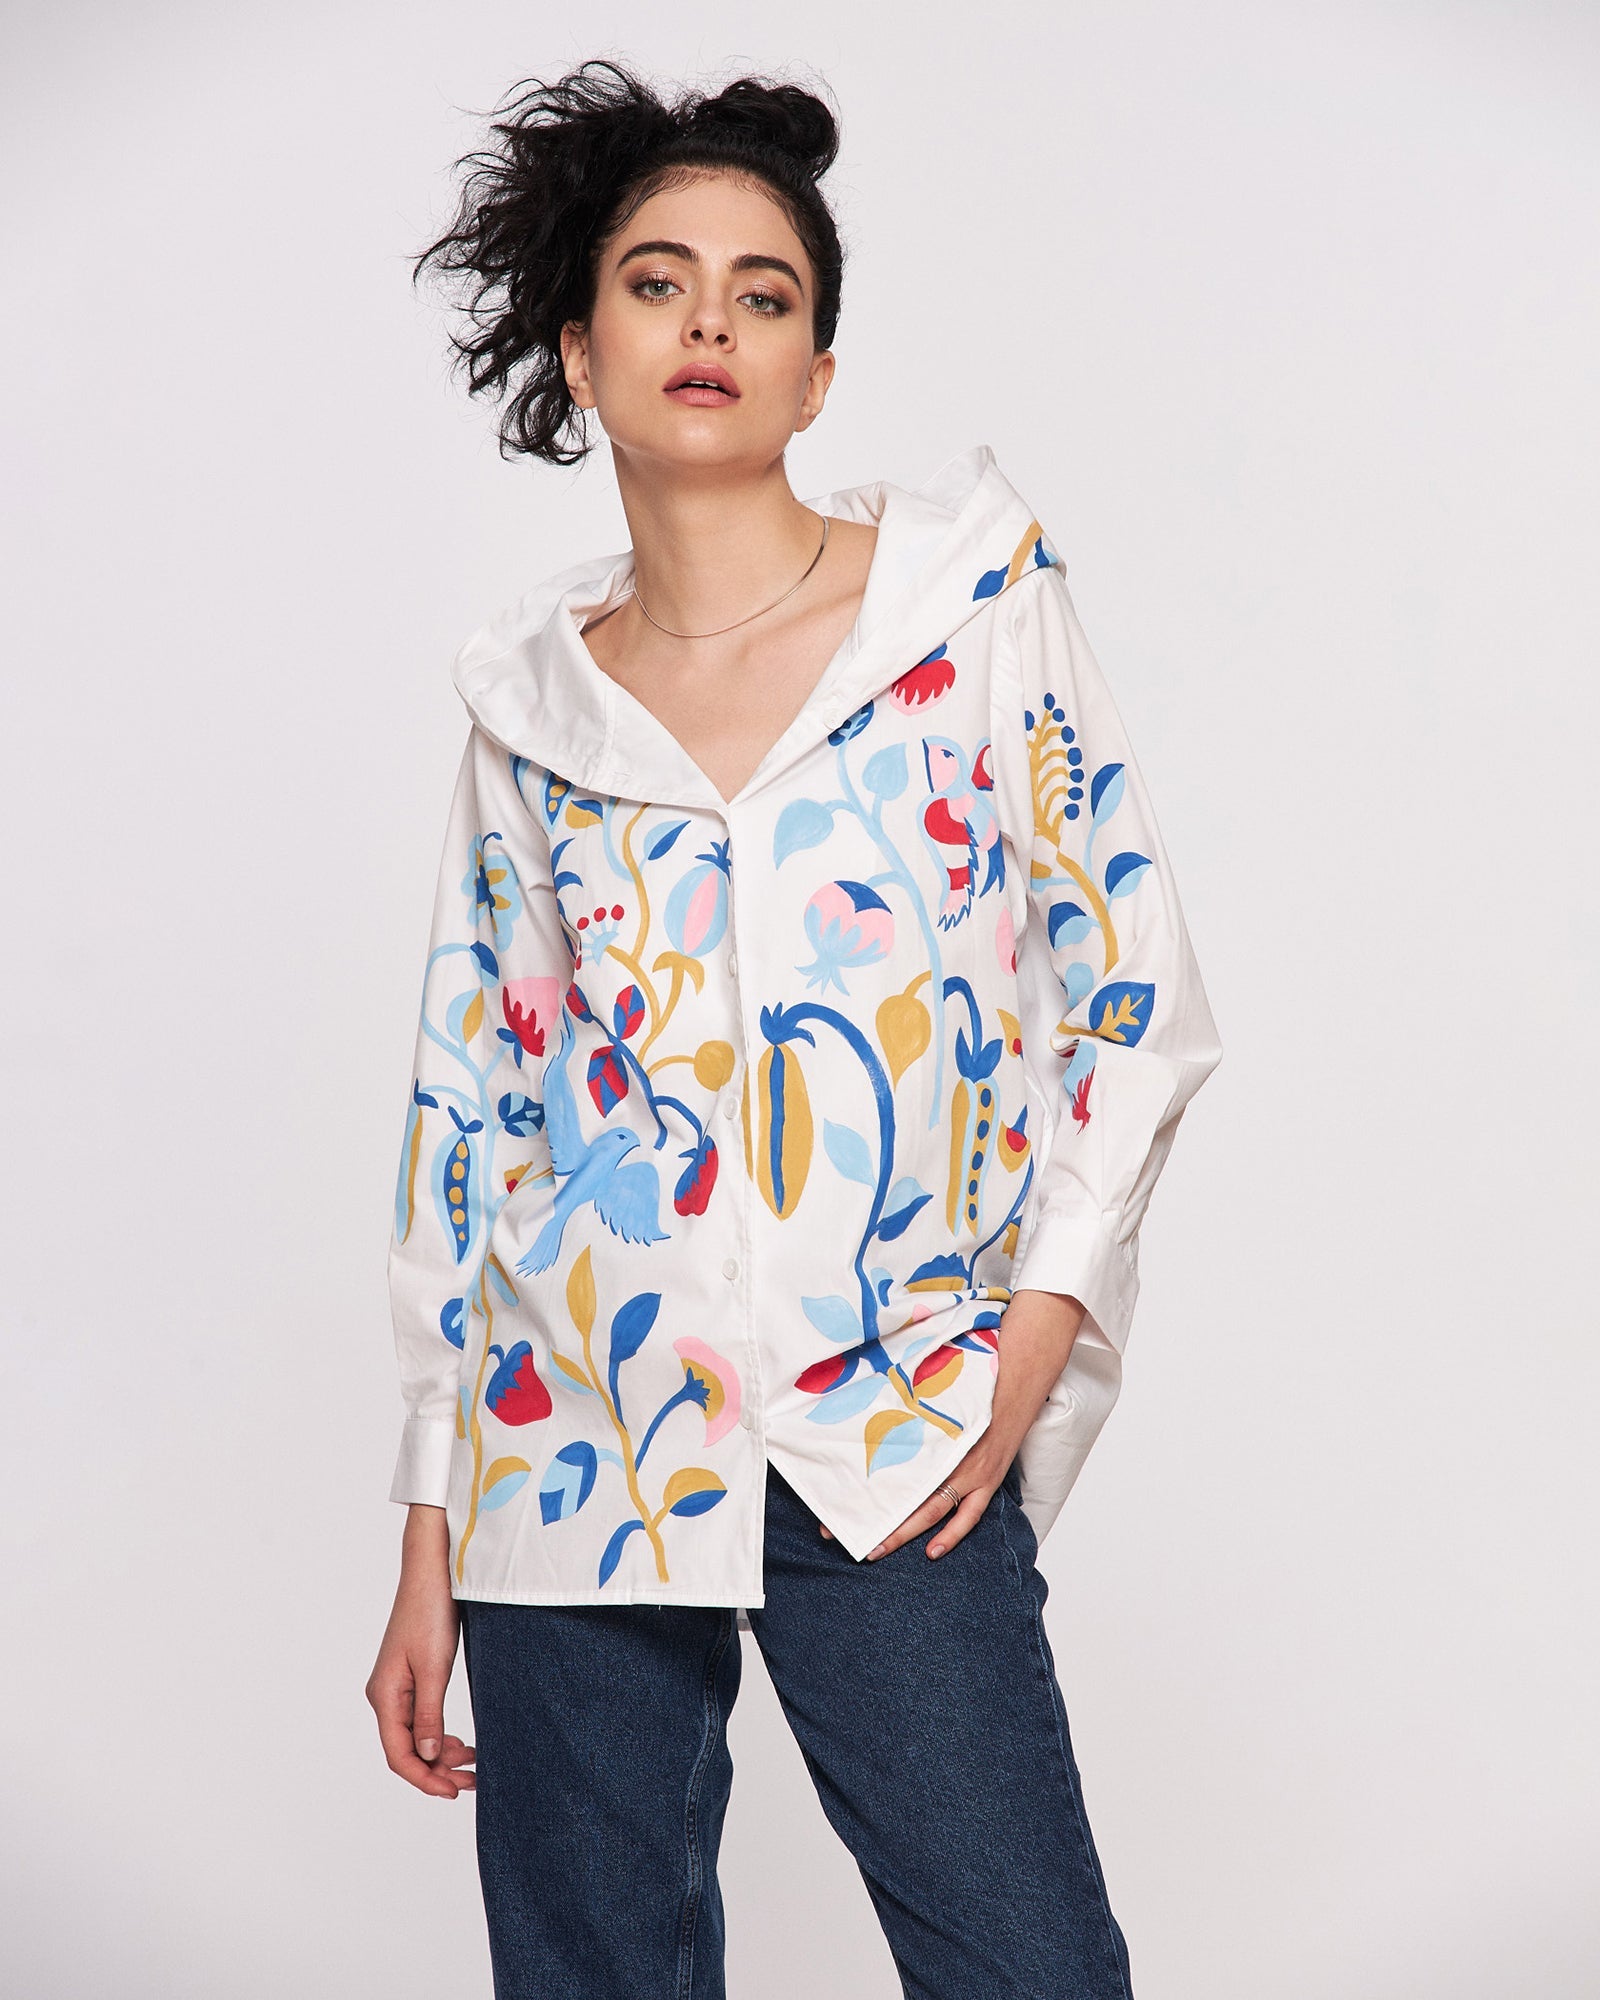 "Labyrinth of Flowers" women's hooded shirt